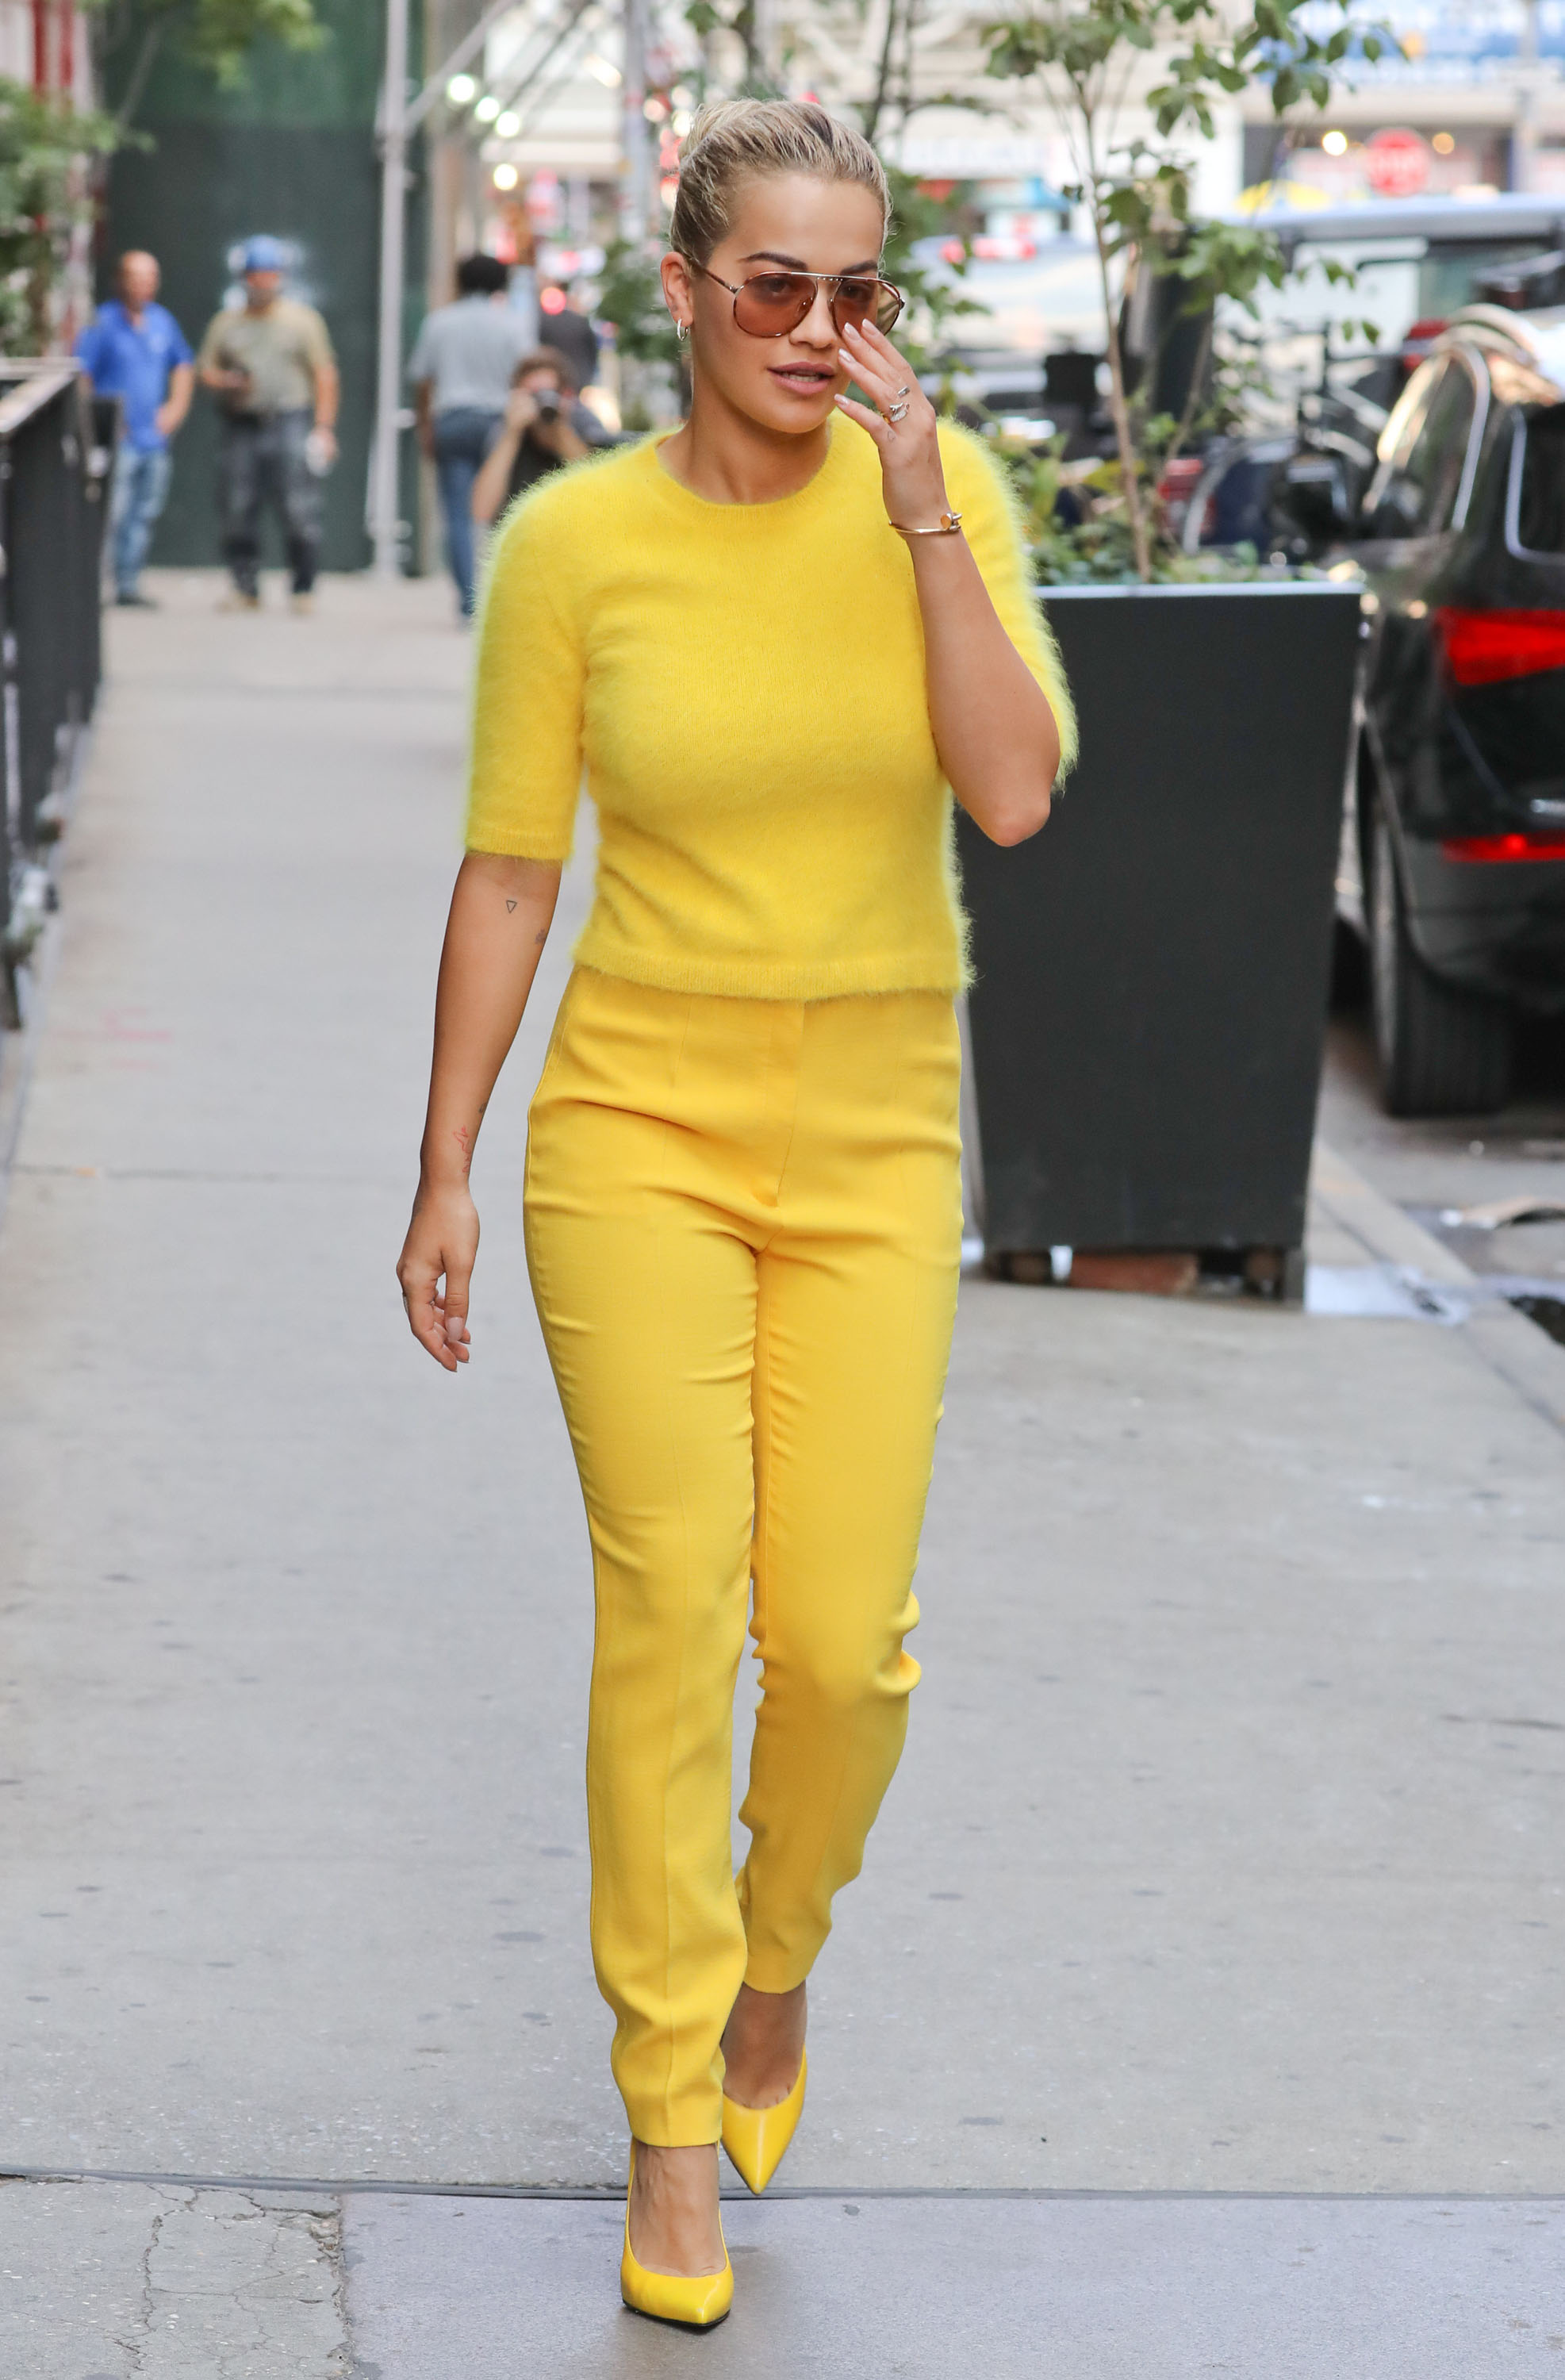 Rita Ora steps out dressed head to toe in yellow in New York City_07.jpg